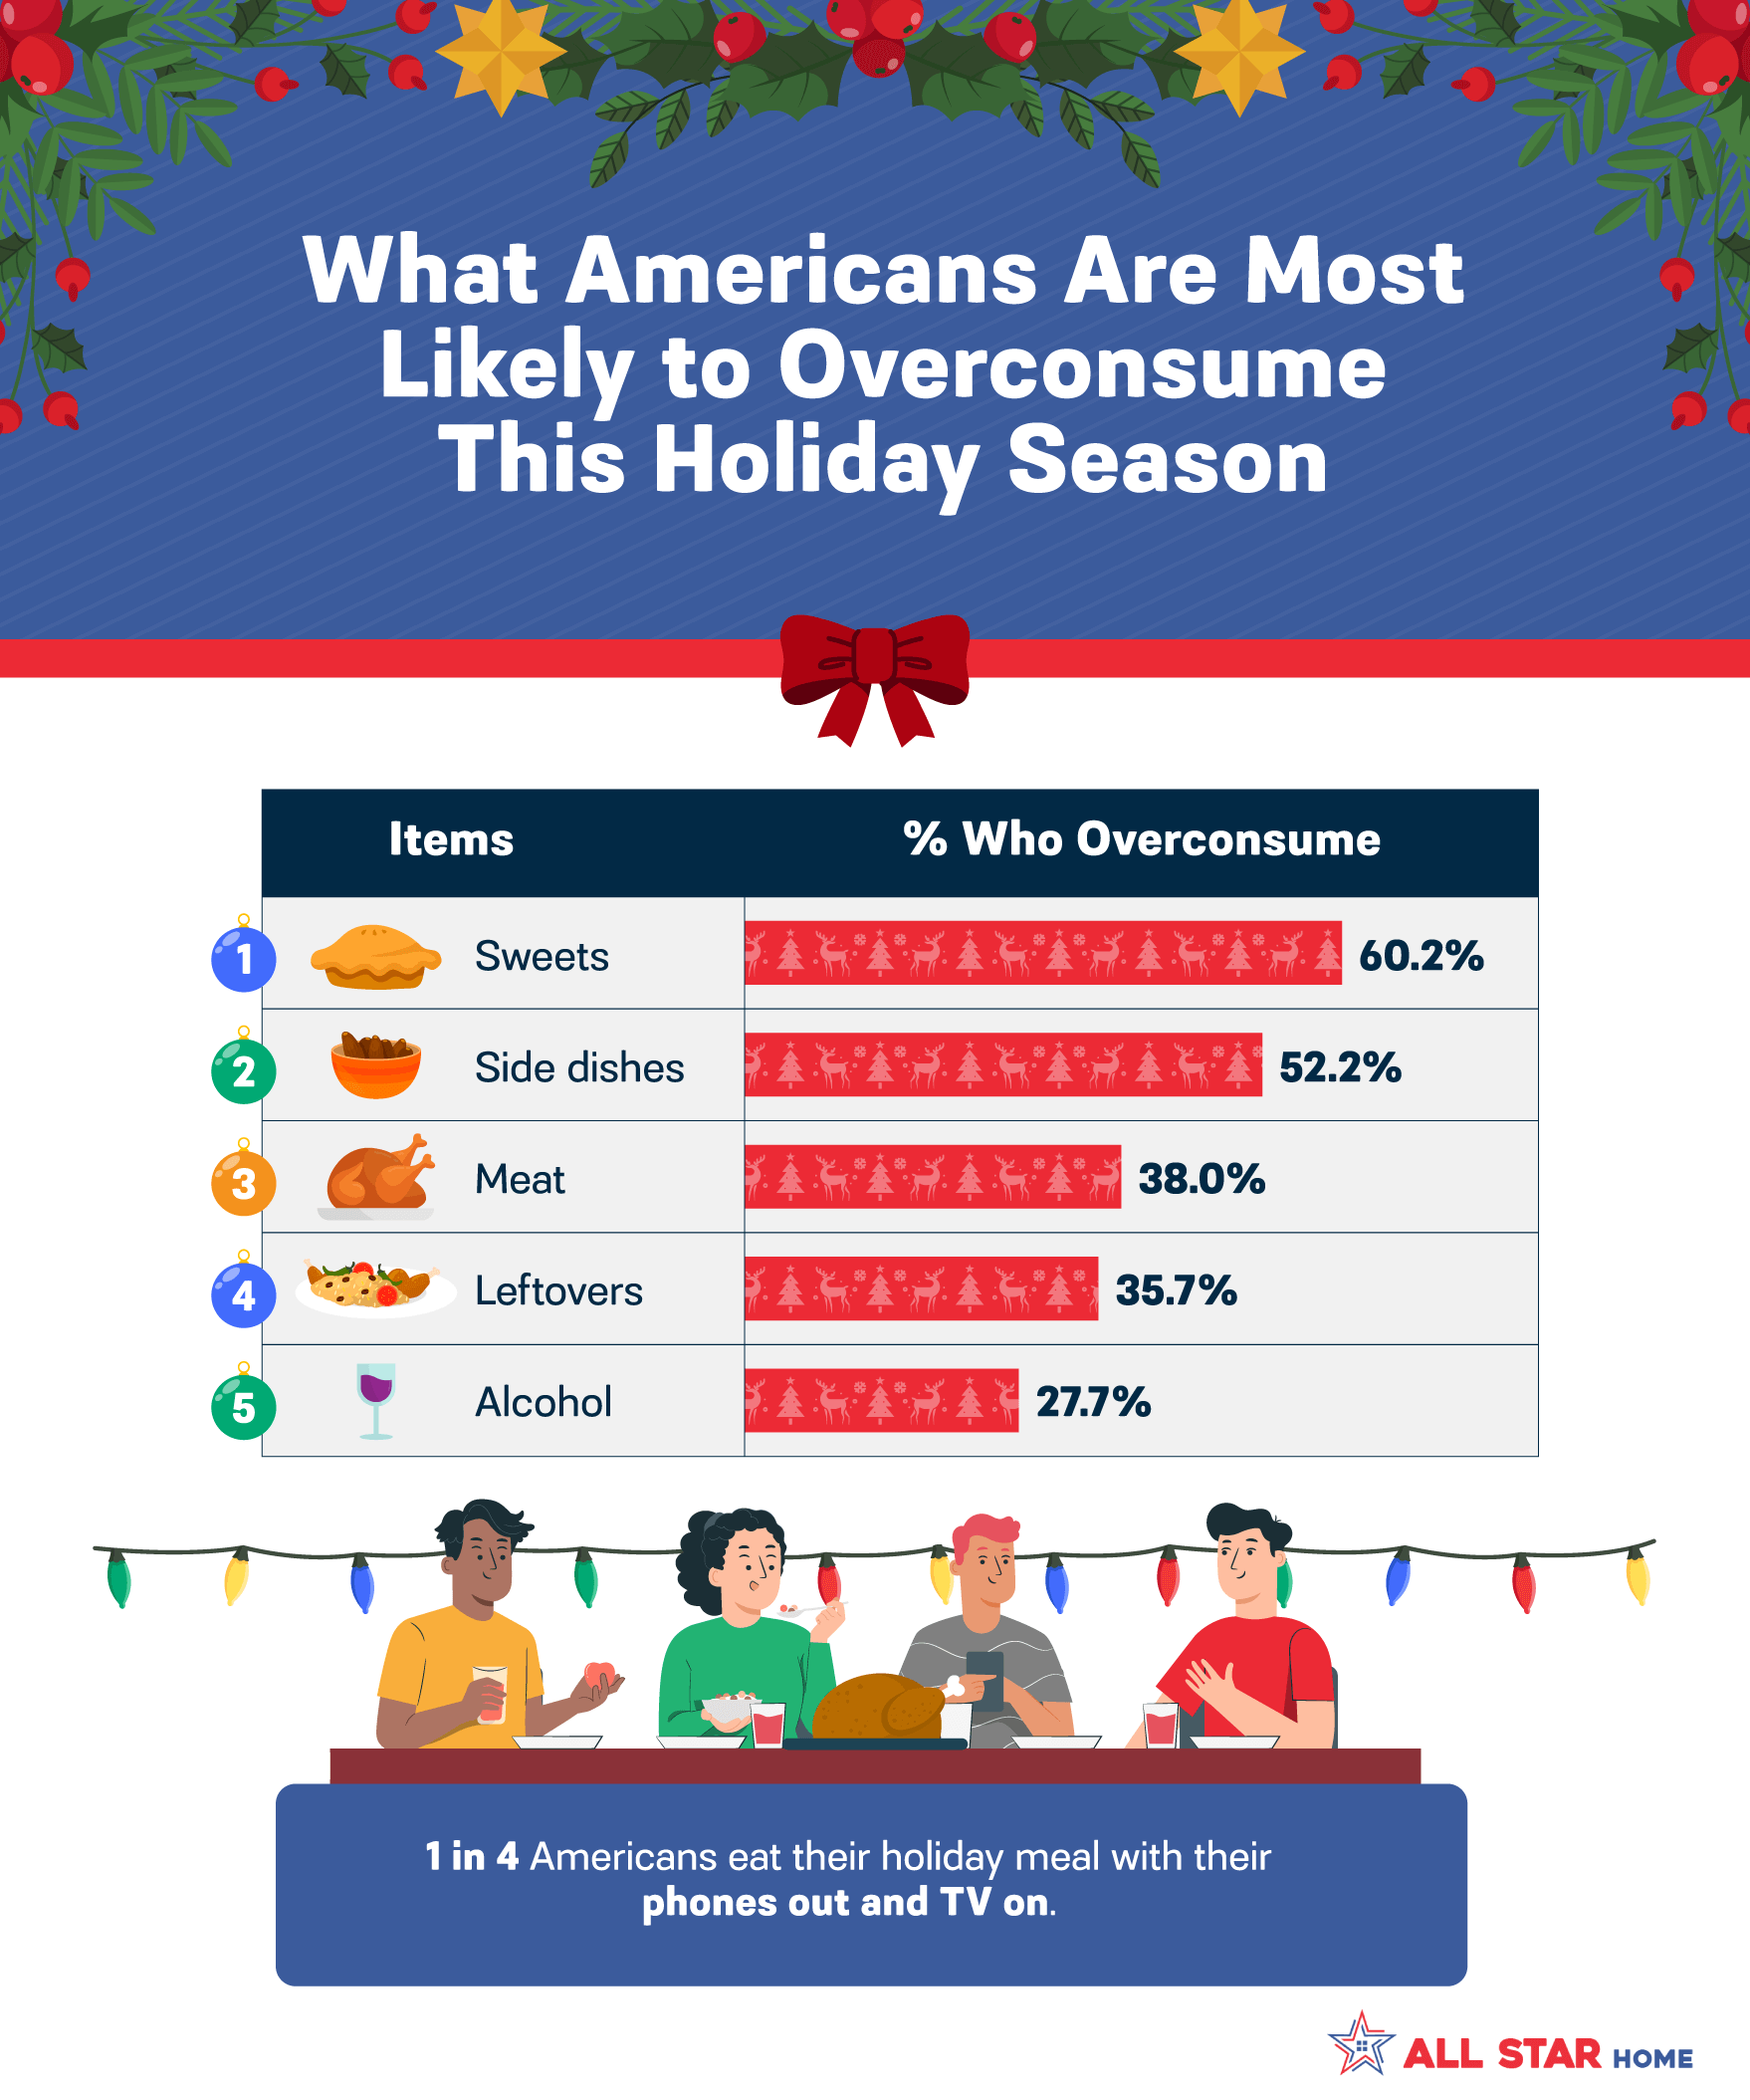 A bar chart showing the food and beverages Americans are most likely to overconsume during the holidays